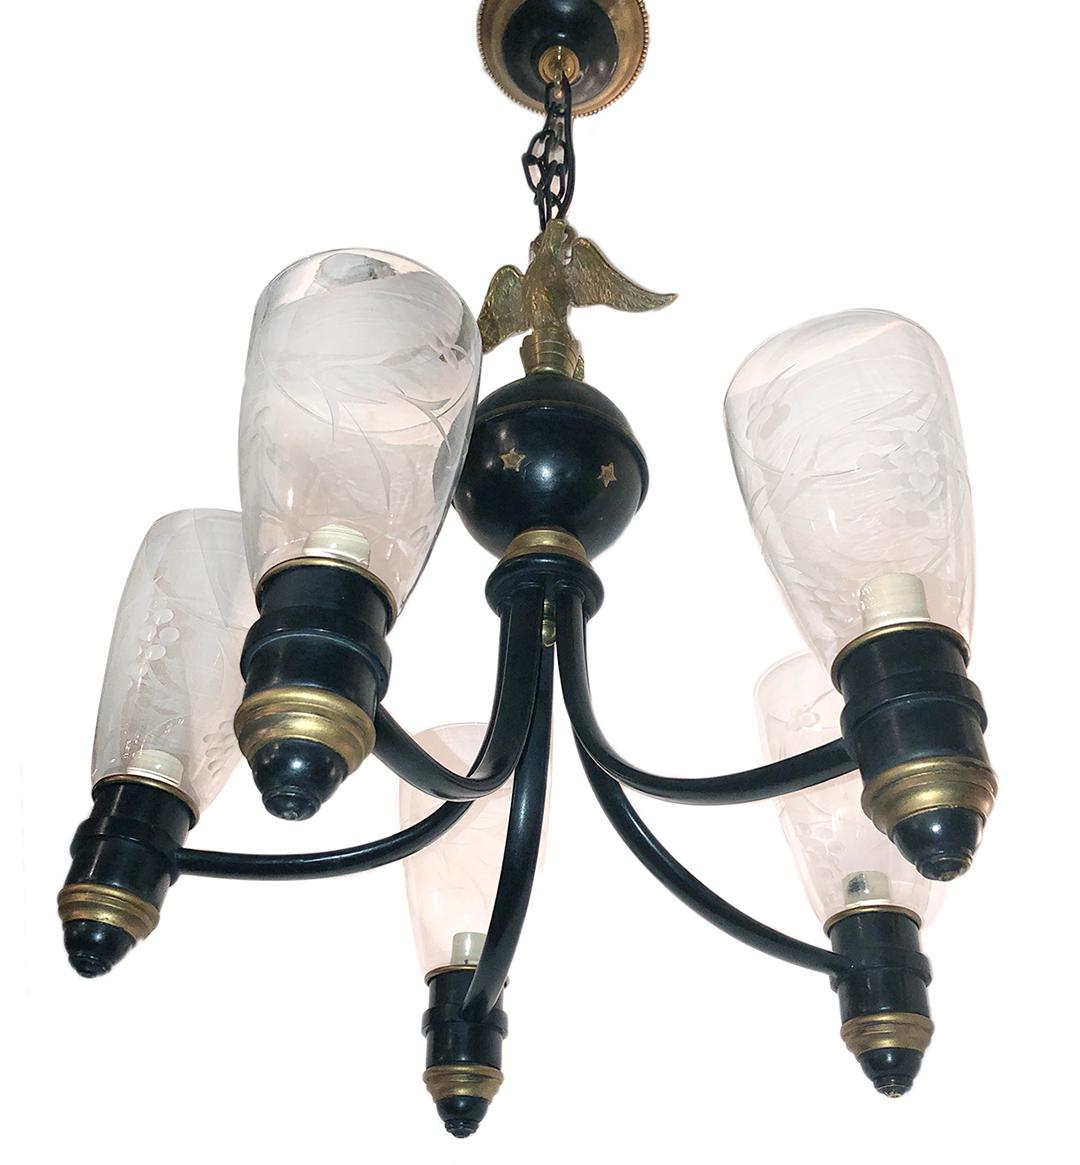 A circa 1940s American bronze chandelier with painted finish and original etched glass hurricanes.

Measurements:
Minimum drop 24